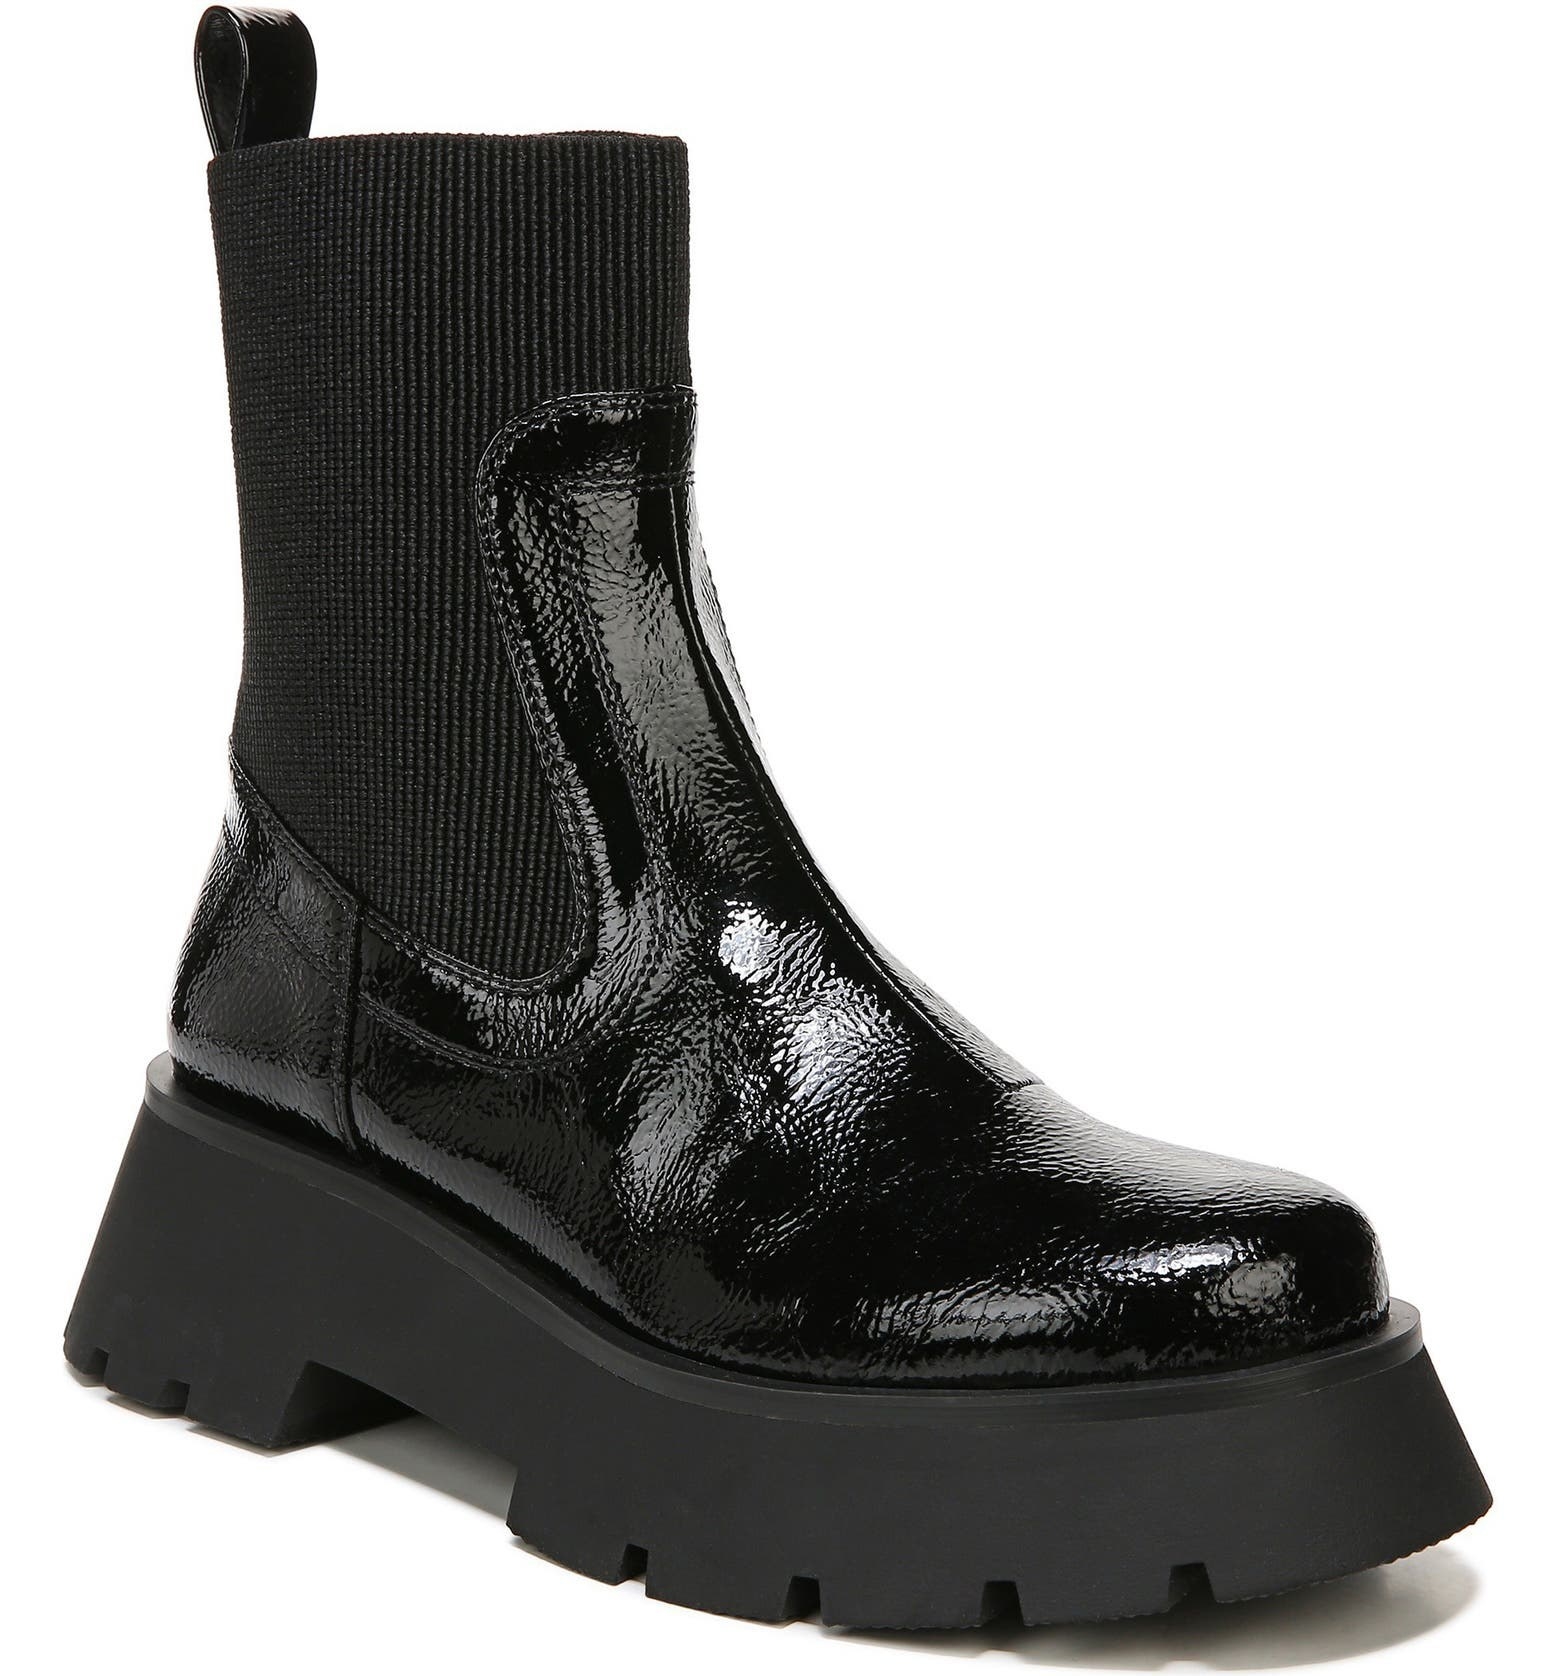 A close up of the boot with glassy faux leather, a stretchy ankle, and chunky sole